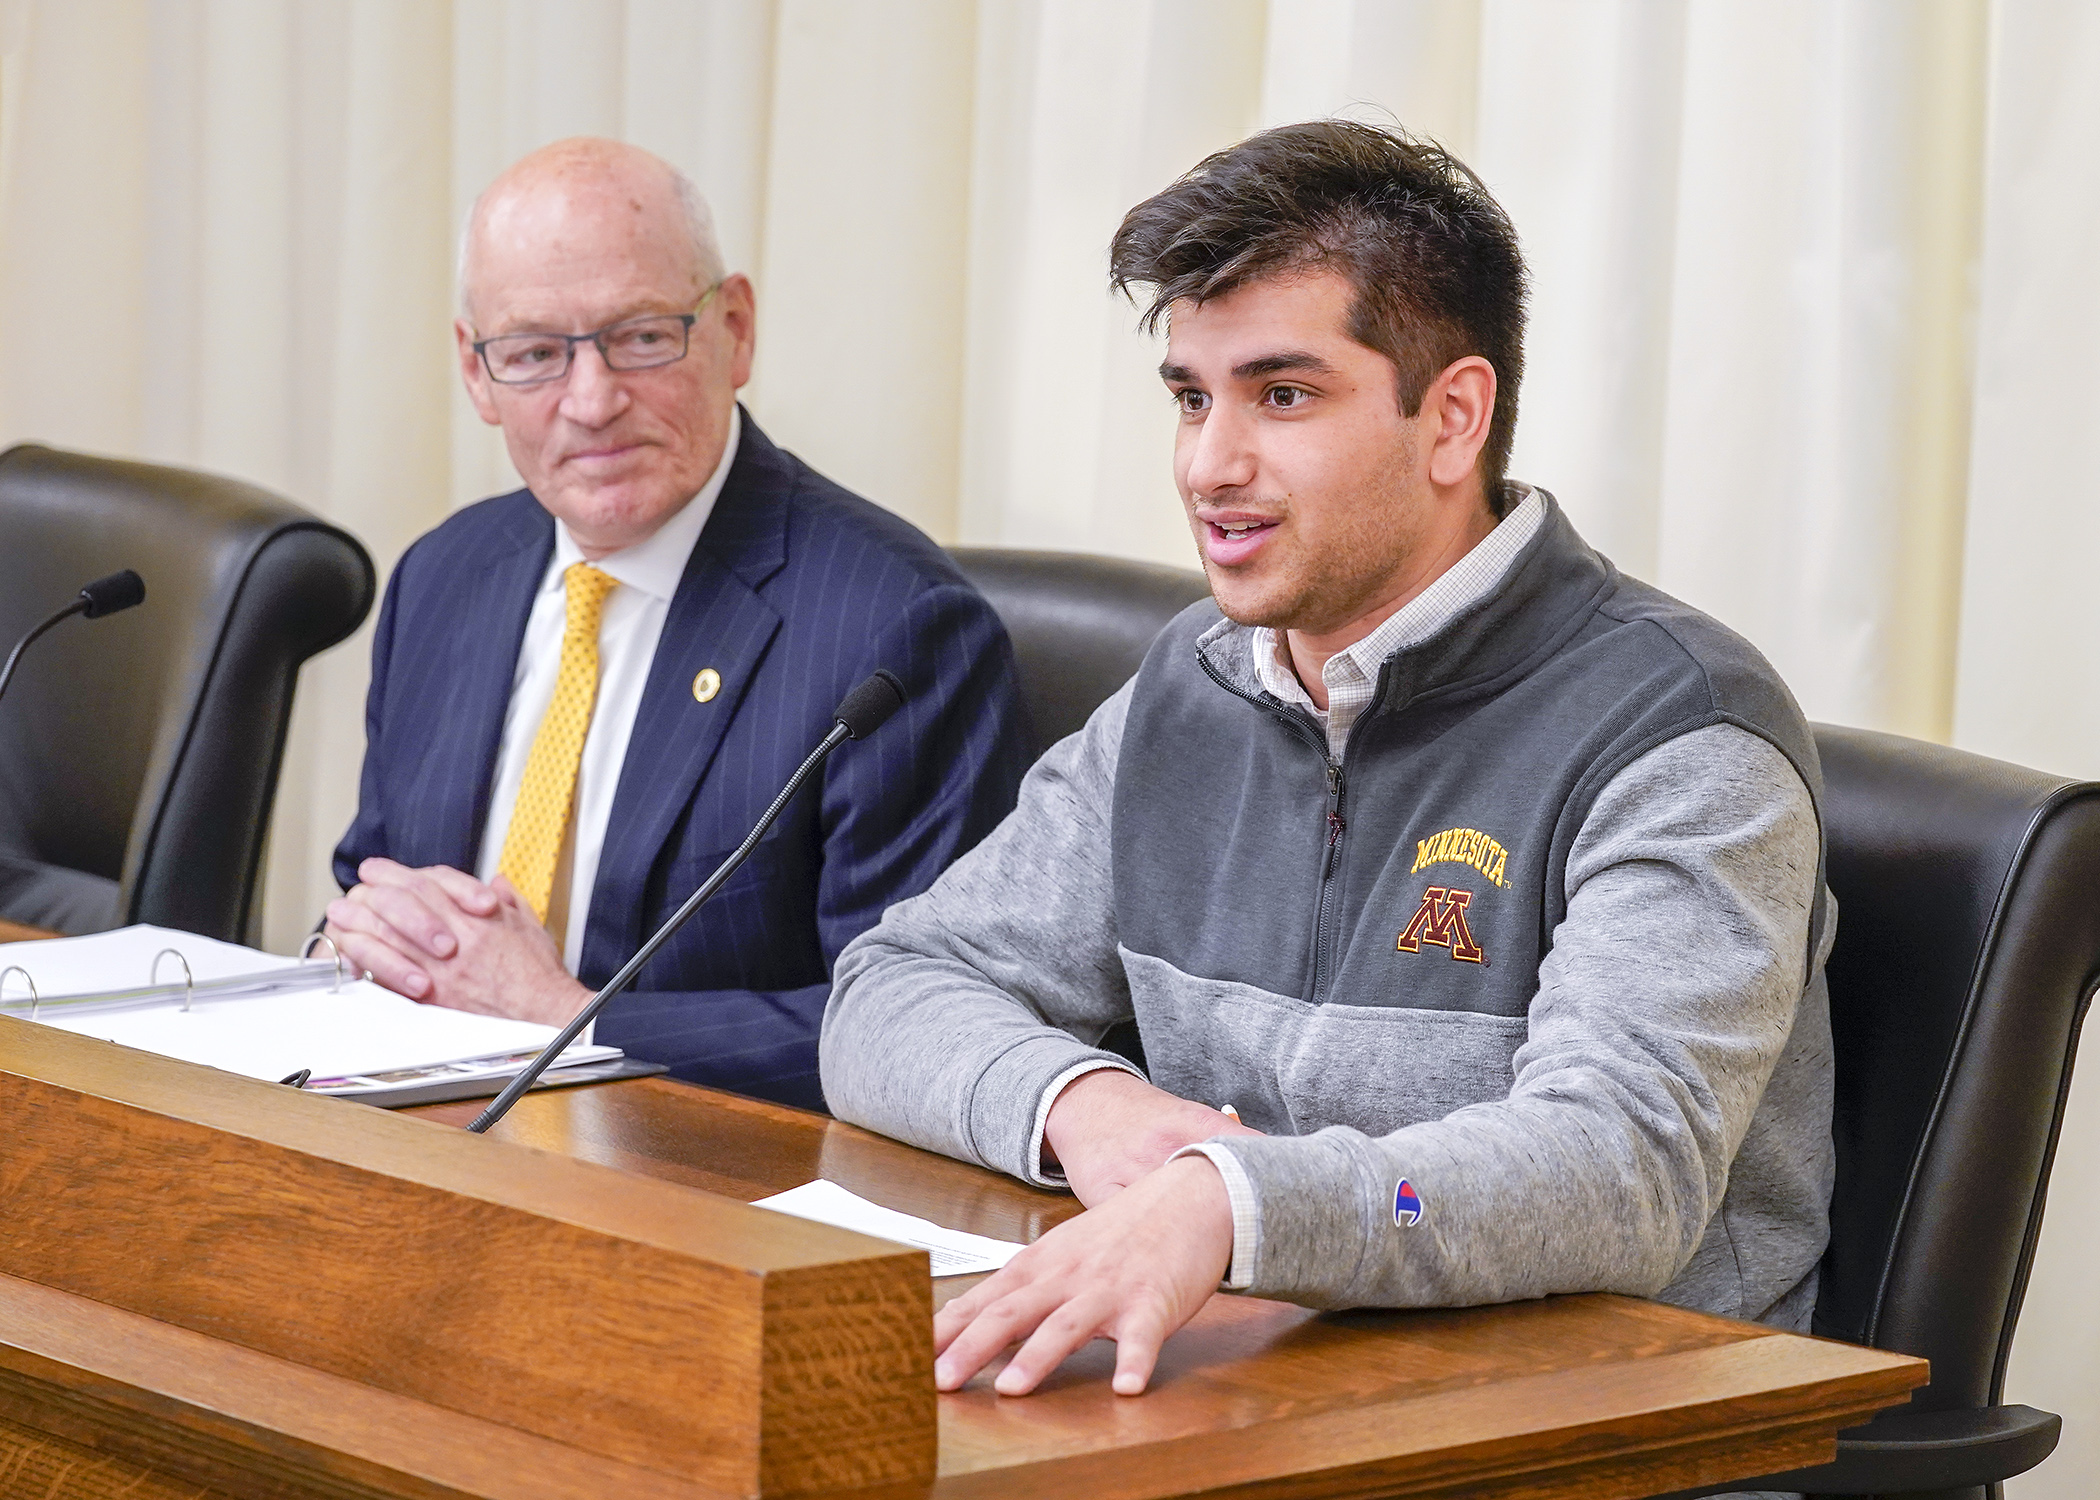 U of M student Mustafa Syed testifies Jan. 18 before House lawmakers with Myron Frans, the school’s senior vice president for finance and operations, during a presentation on asset preservation and replacement needs.